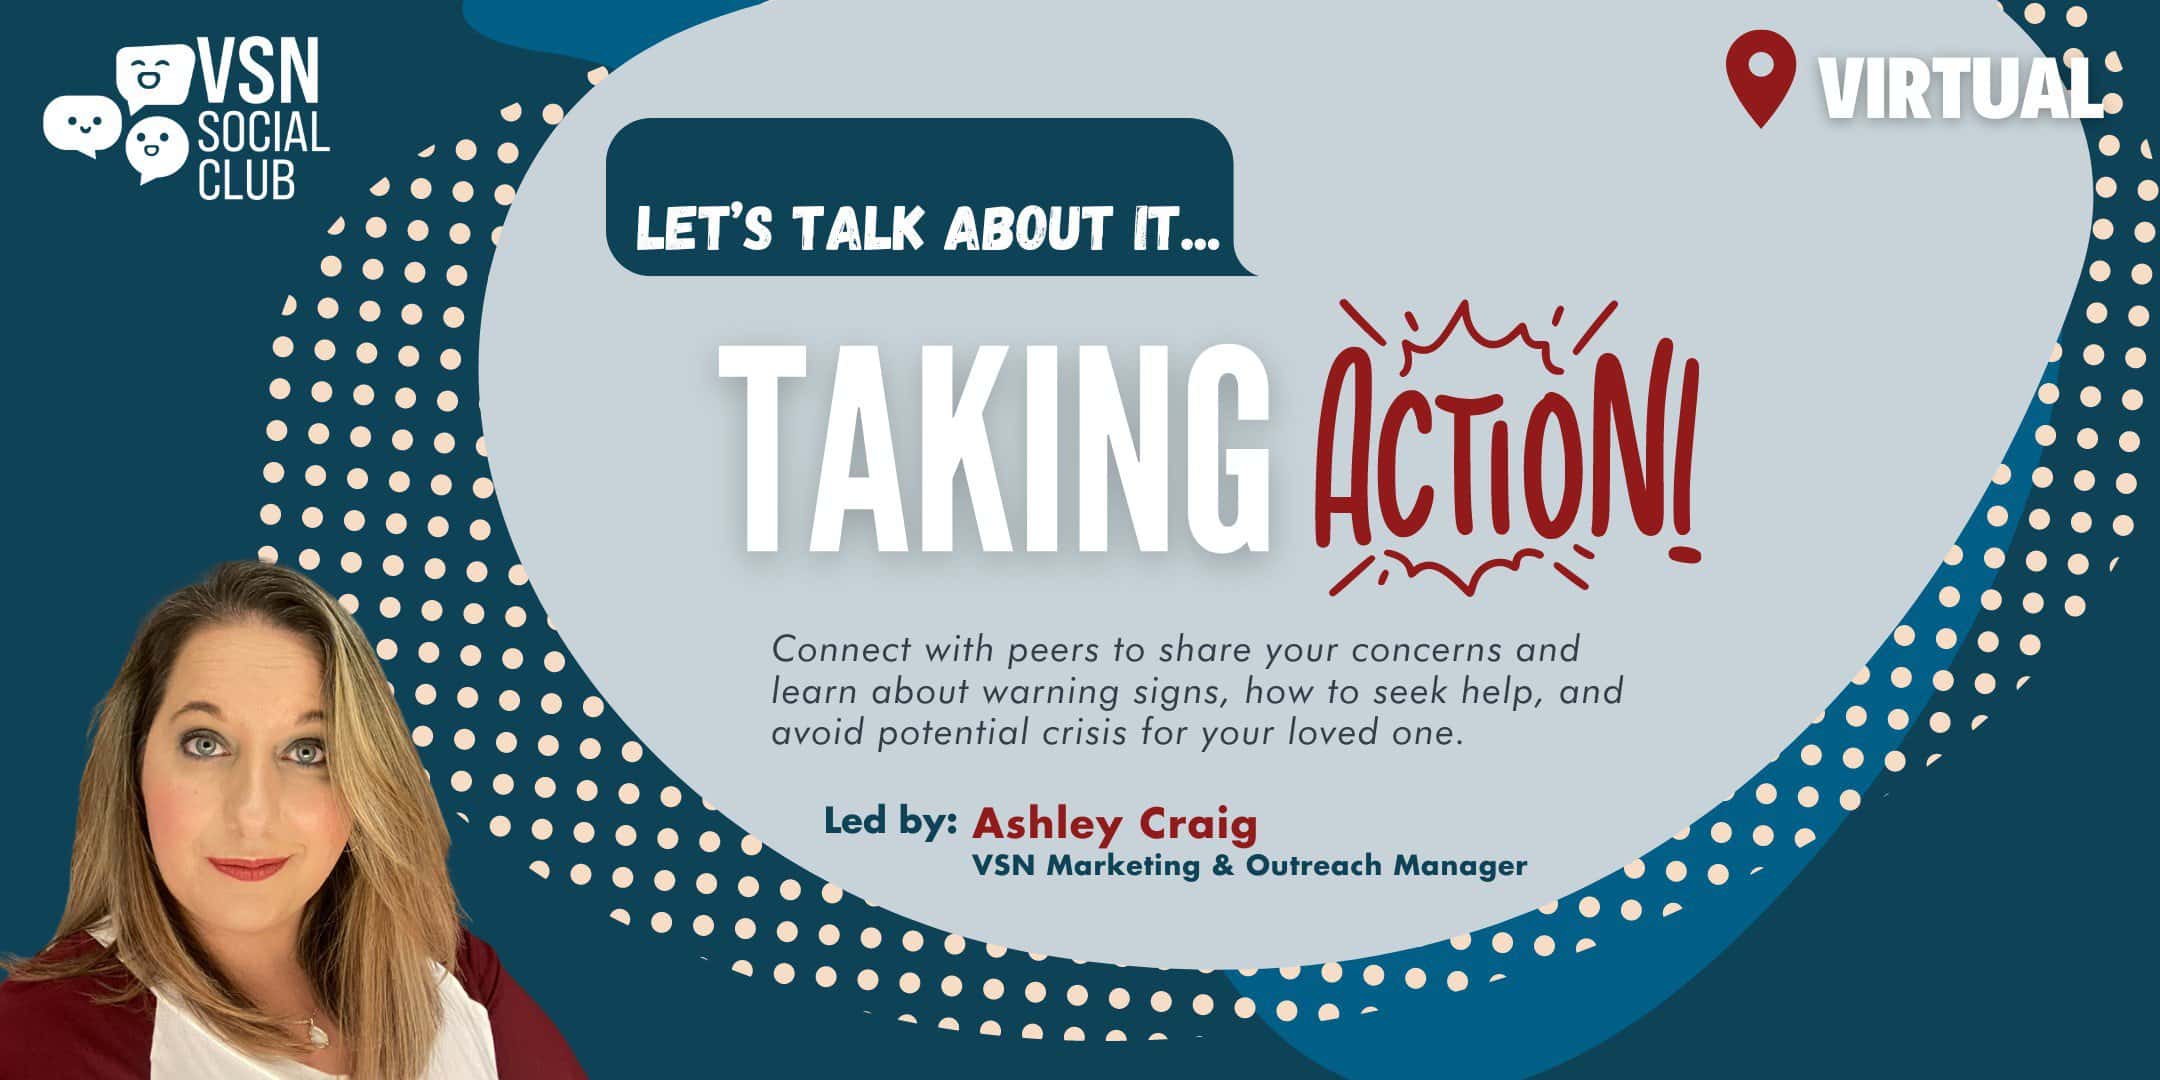 Let's Talk About It... Taking Action with Ashley Craig